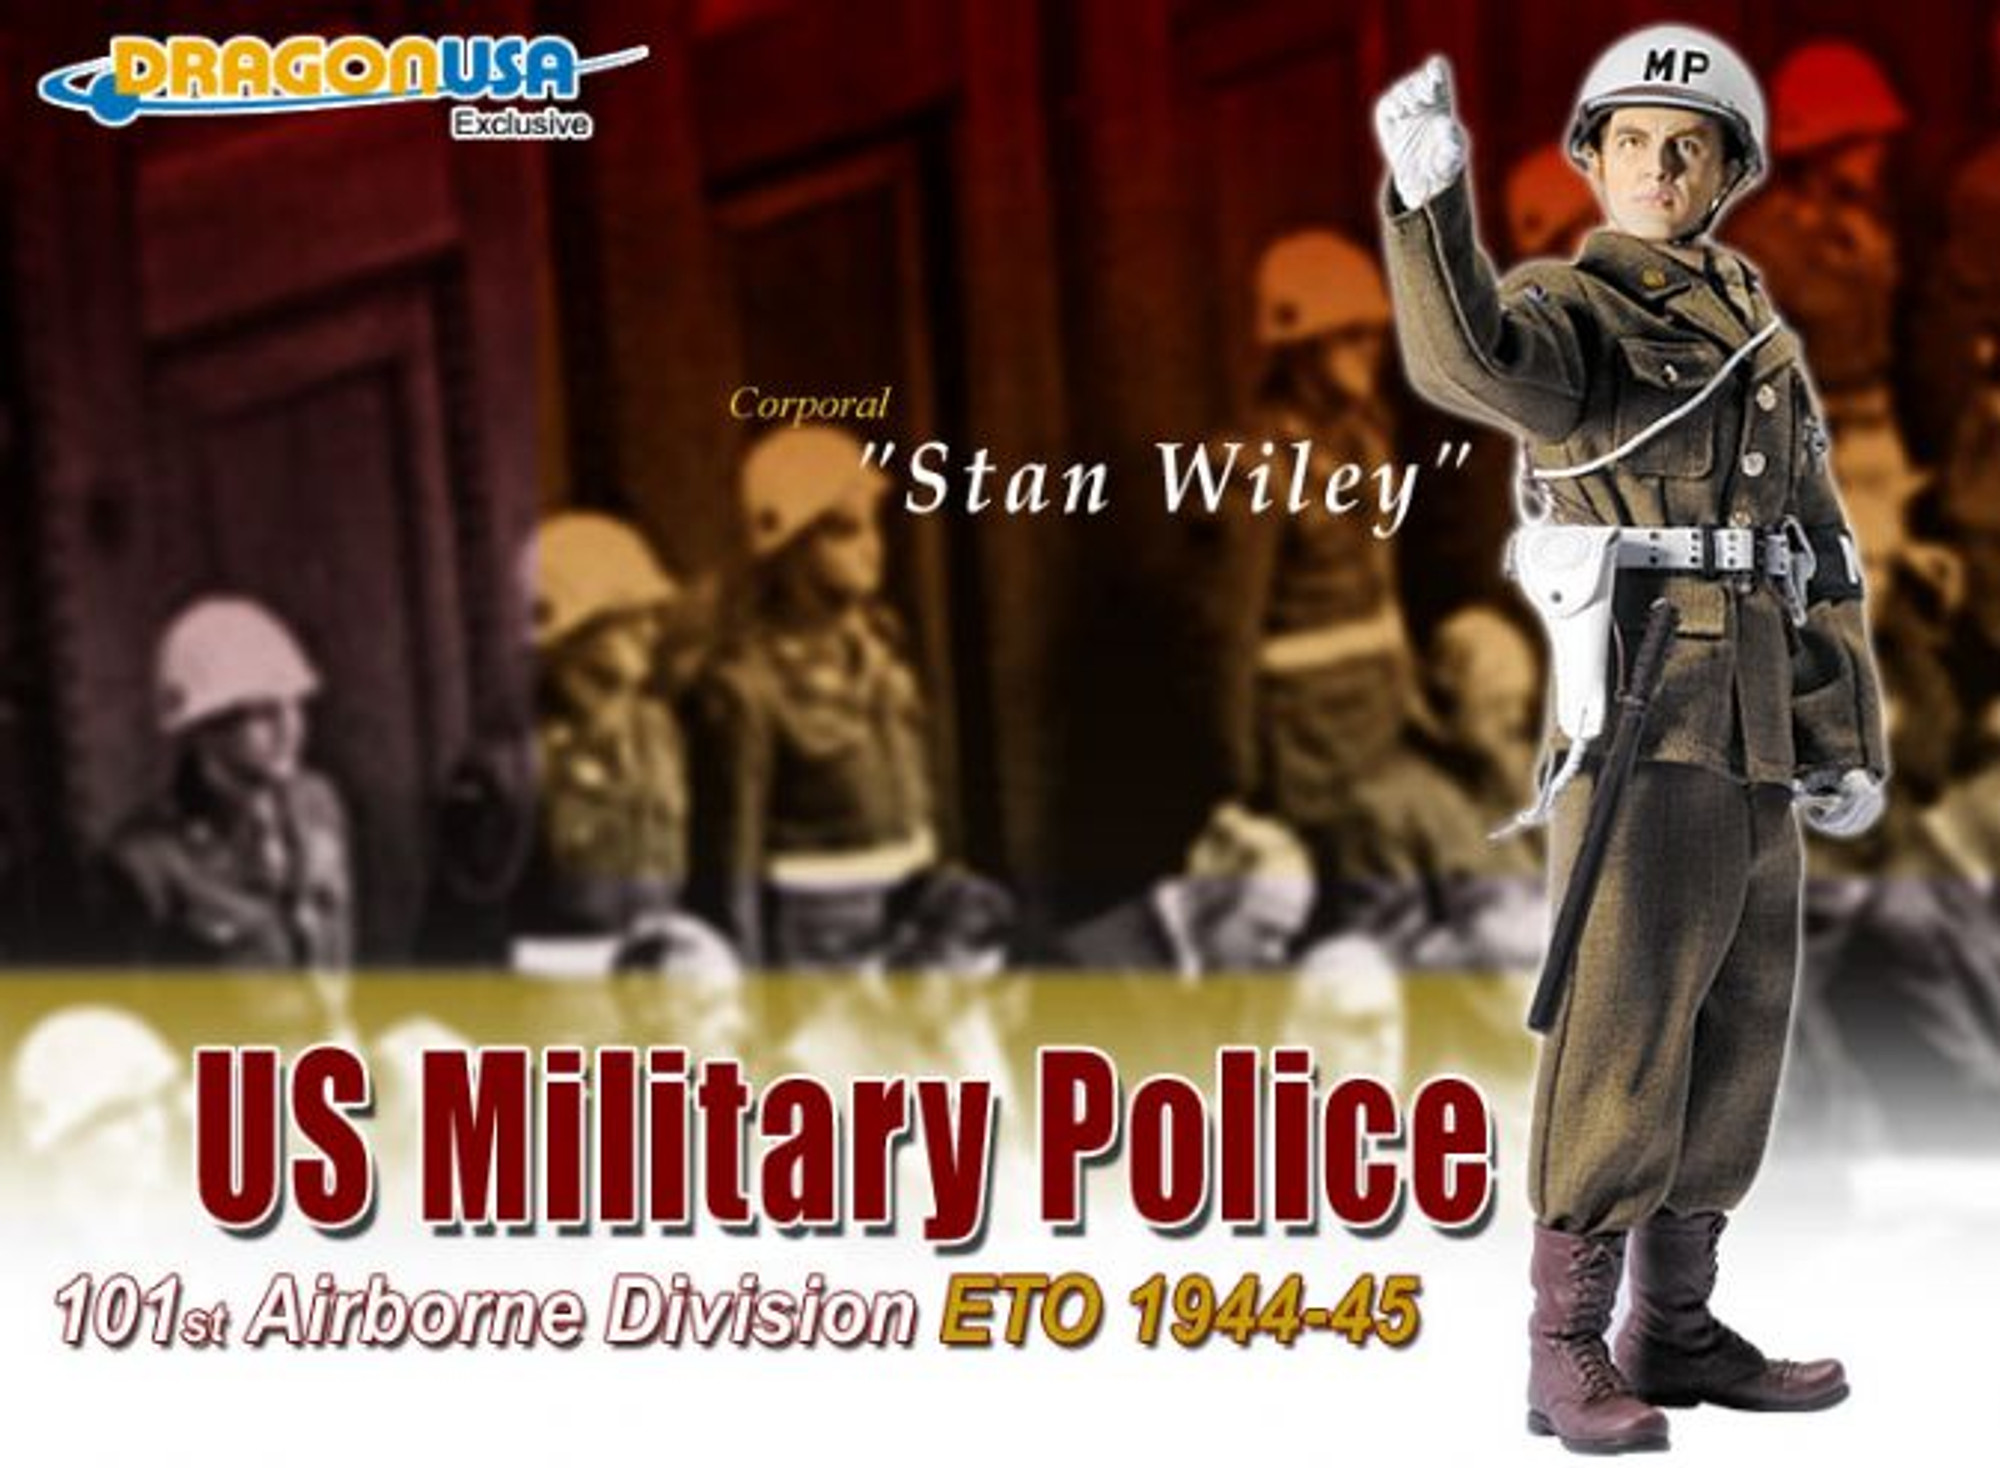 "Stan Wiley", U.S. Military Police, 101st Airborne Division, ETO 1944-45 (Corporal)